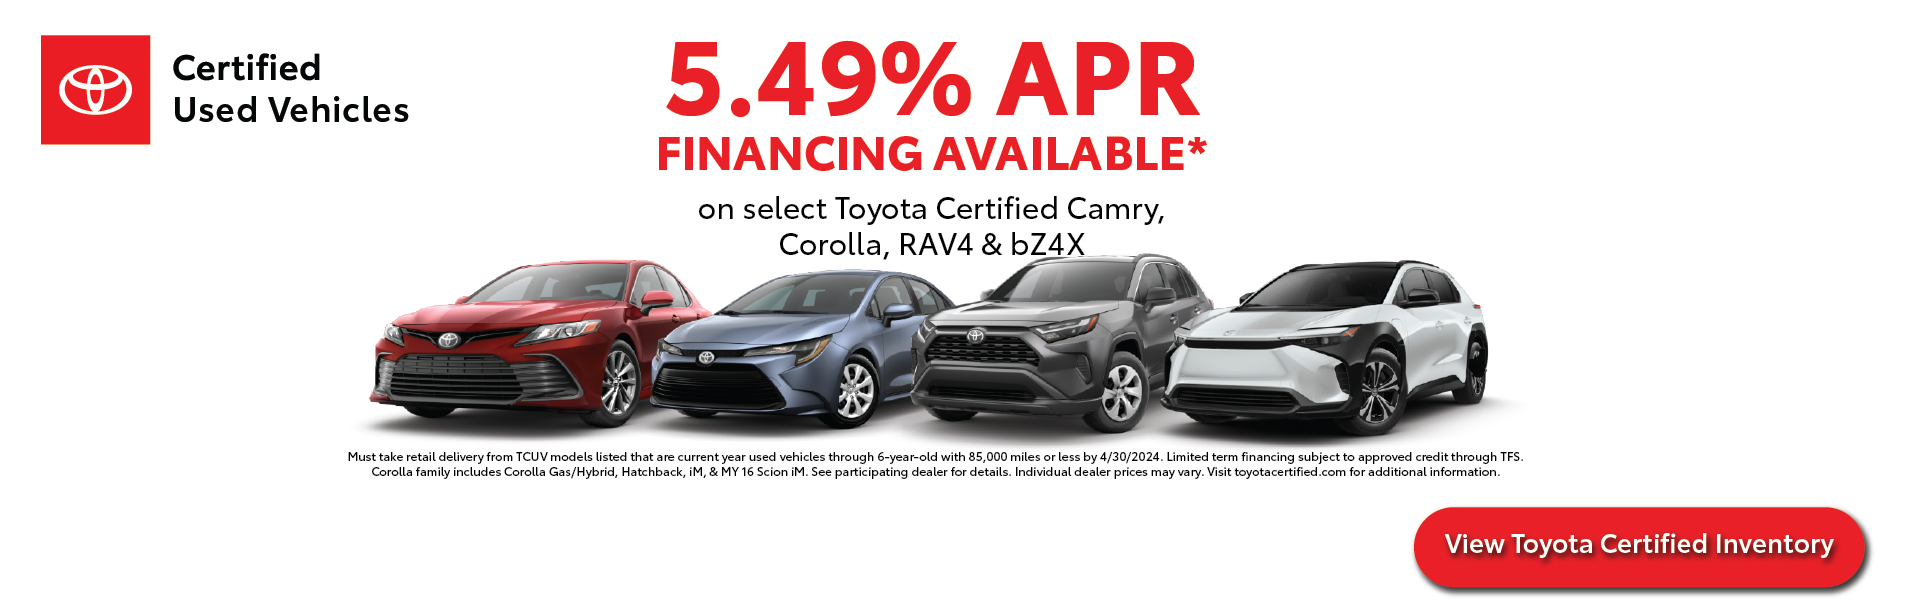 Toyota Certified Used Vehicle Offer | Classic Toyota in Waukegan IL